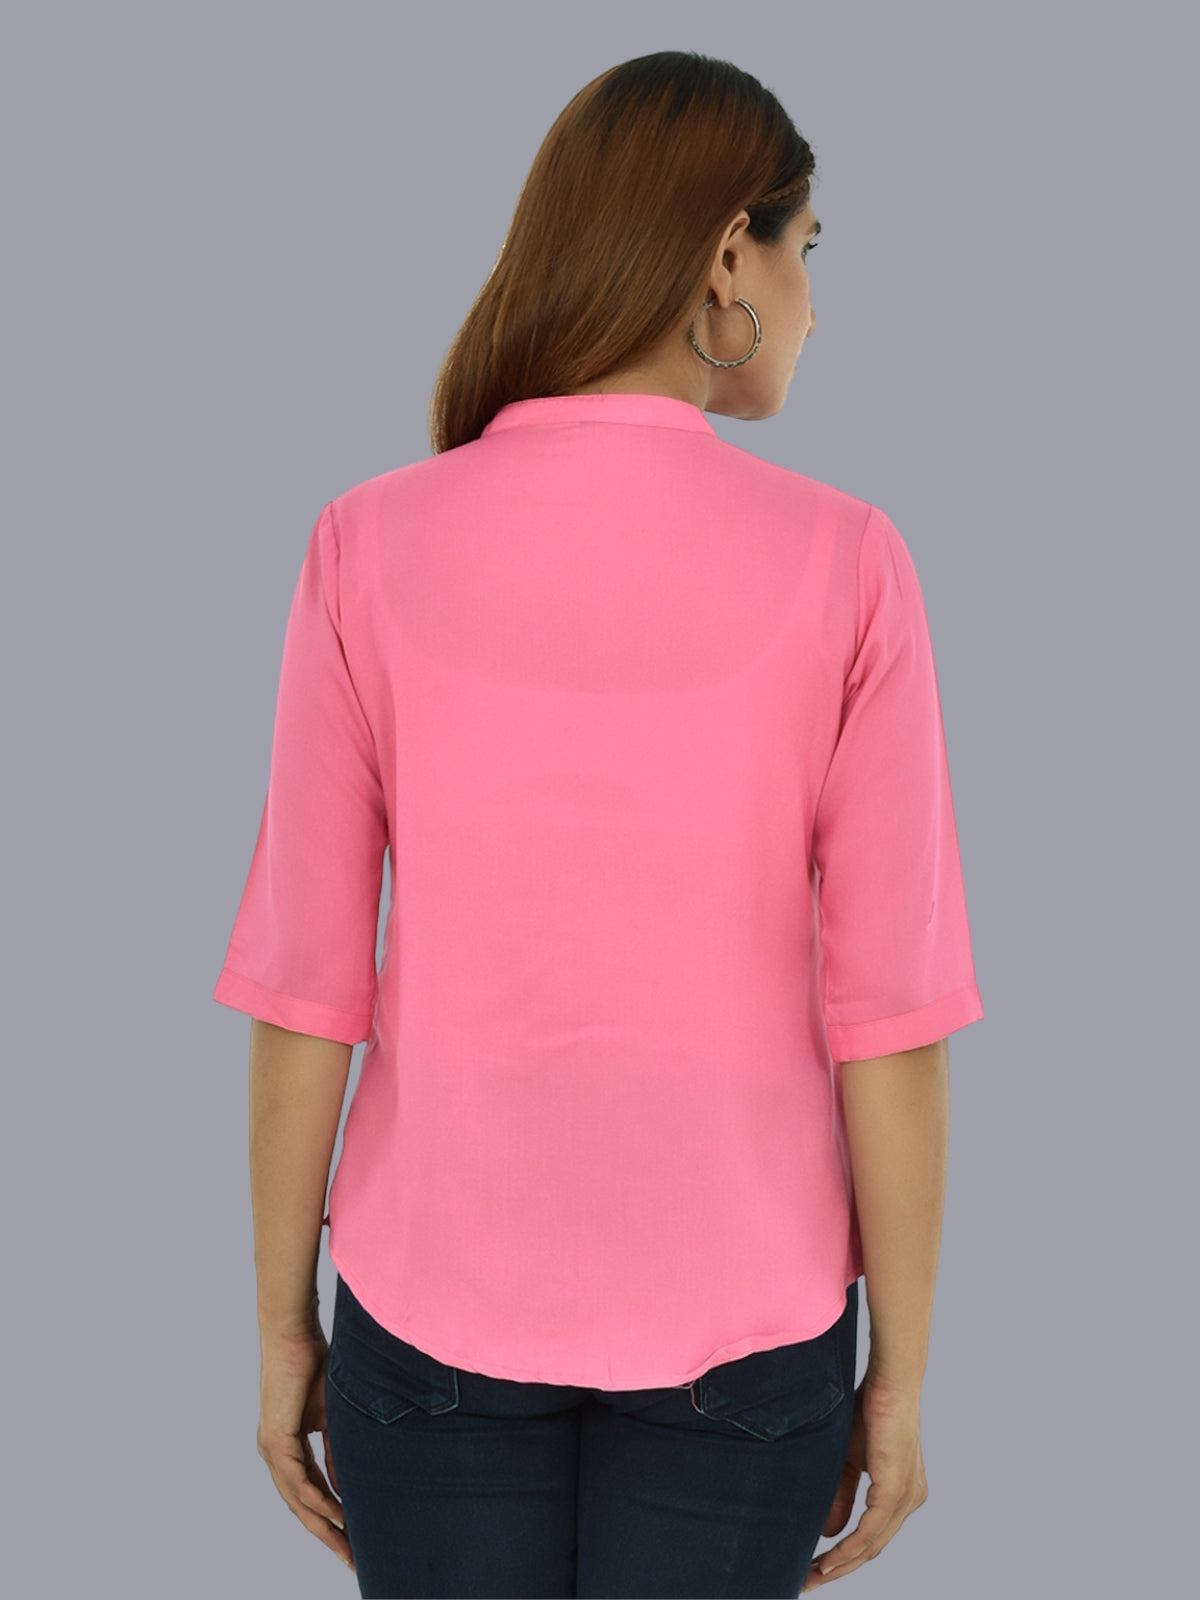 Pack Of 2 Womens  Solid Pink and Wine Rayon Chinese Collar Shirts Combo